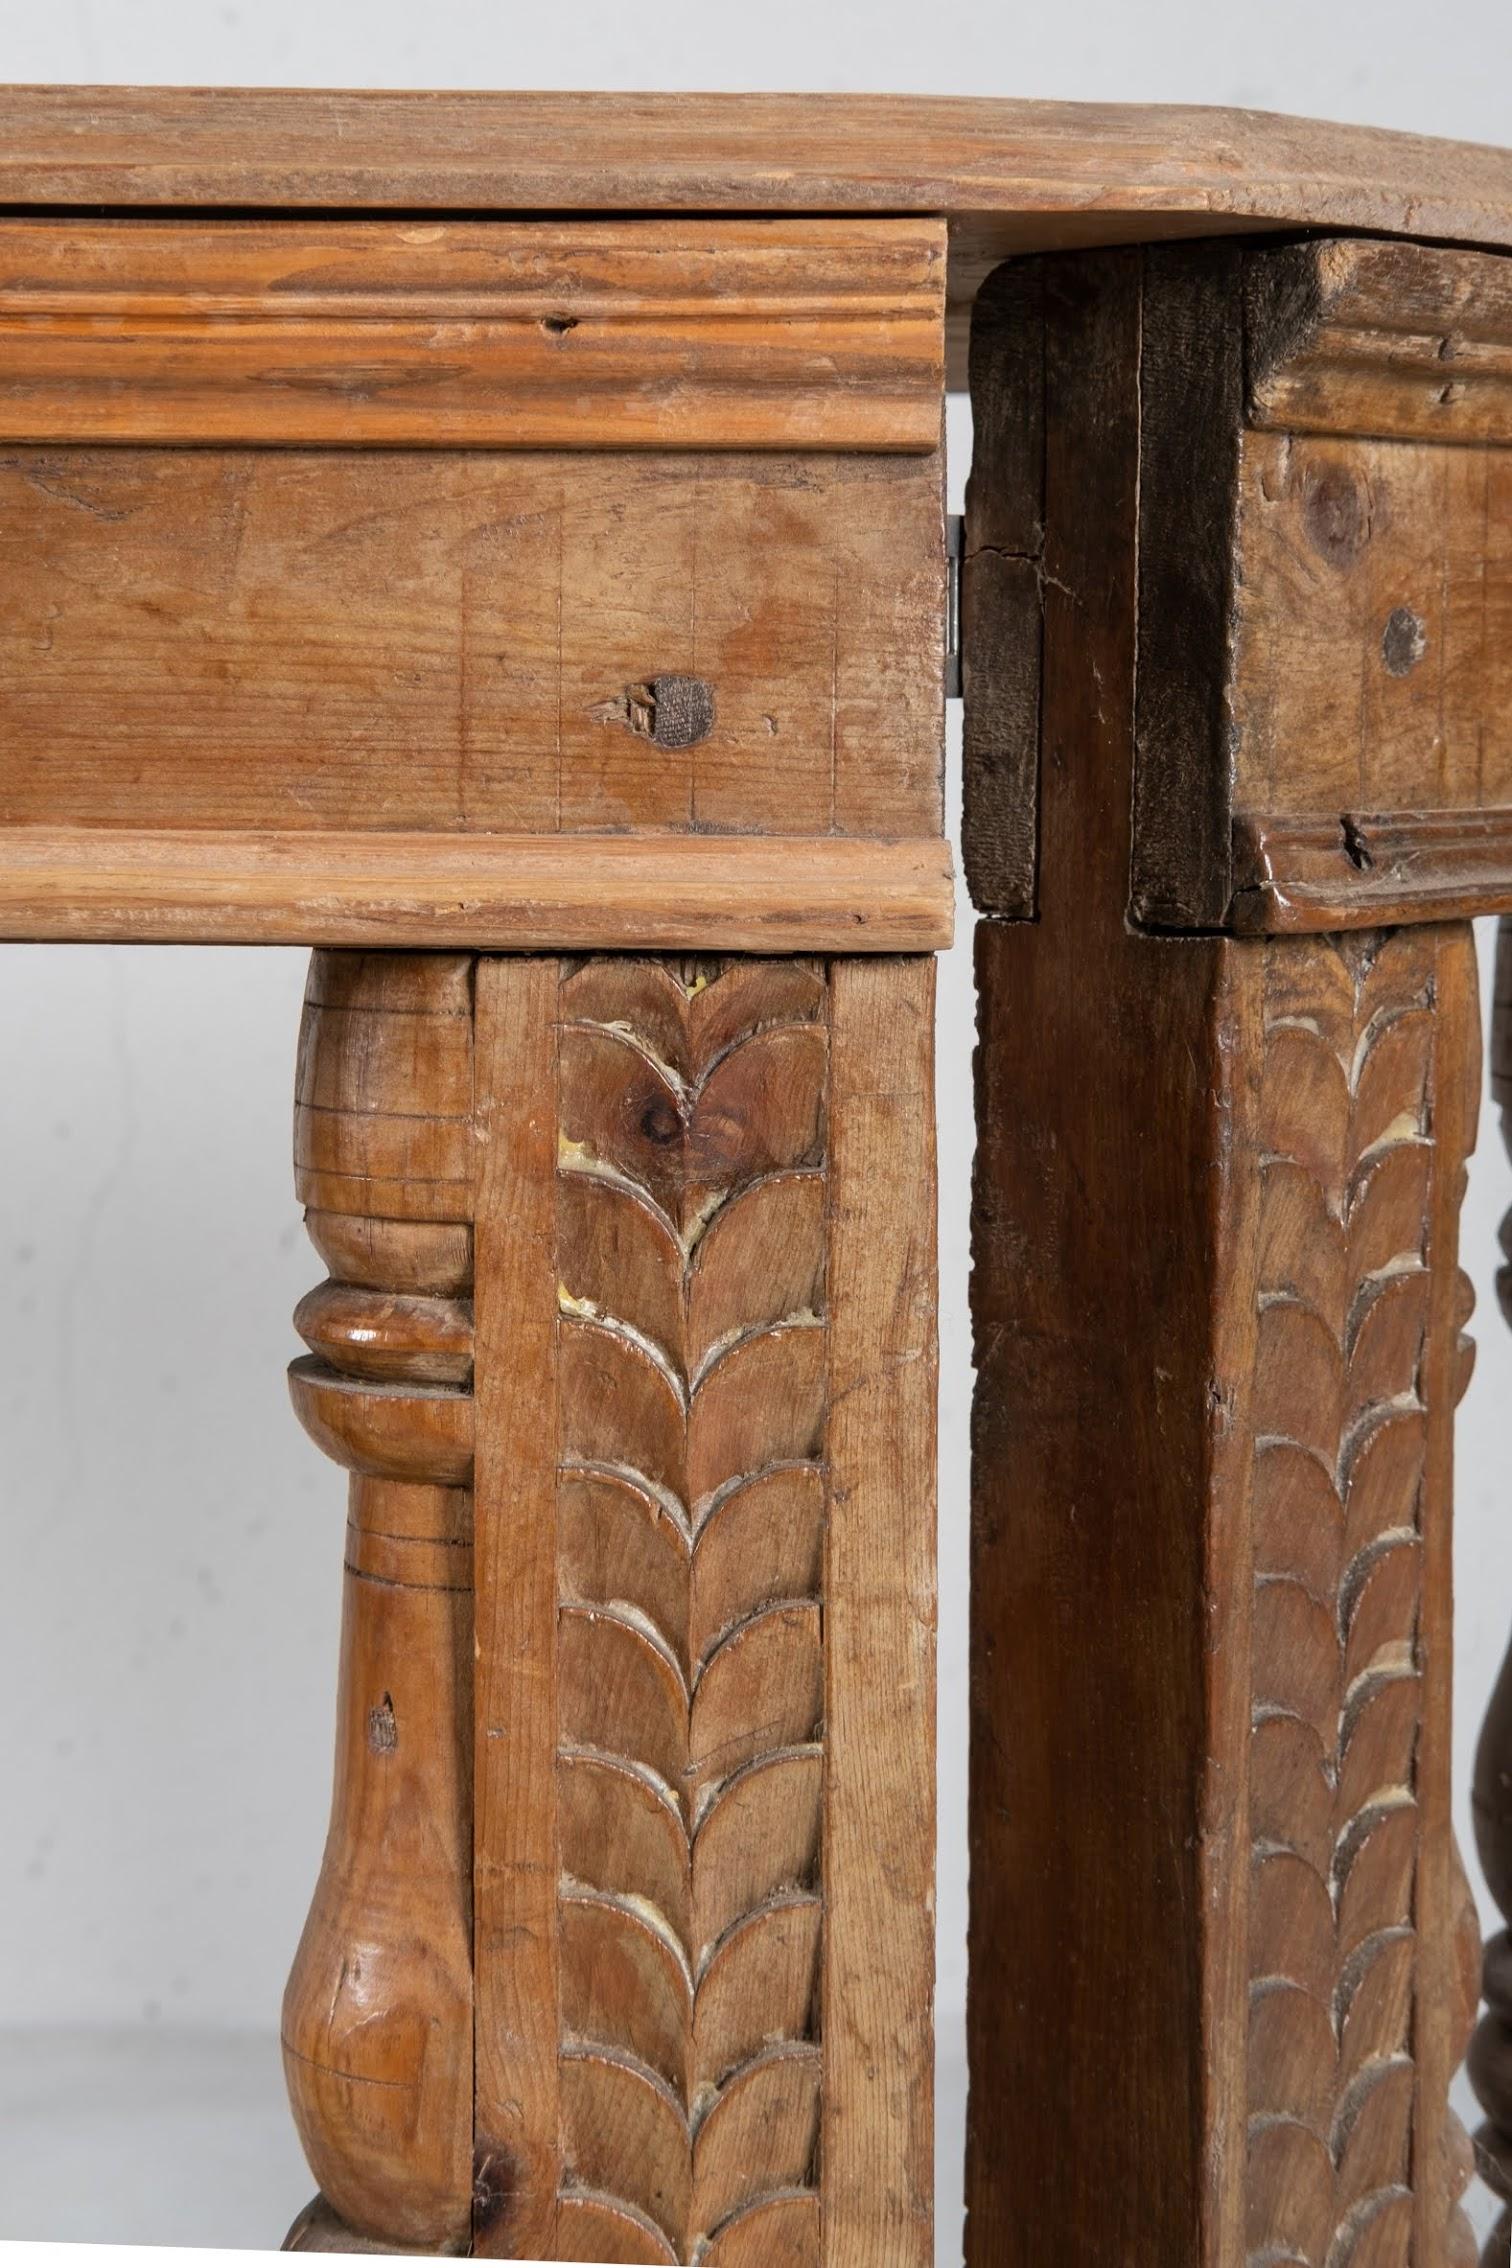 Solid wood console made out of a 18th century arolla pine Balustrade, and a spruce top from the same period.